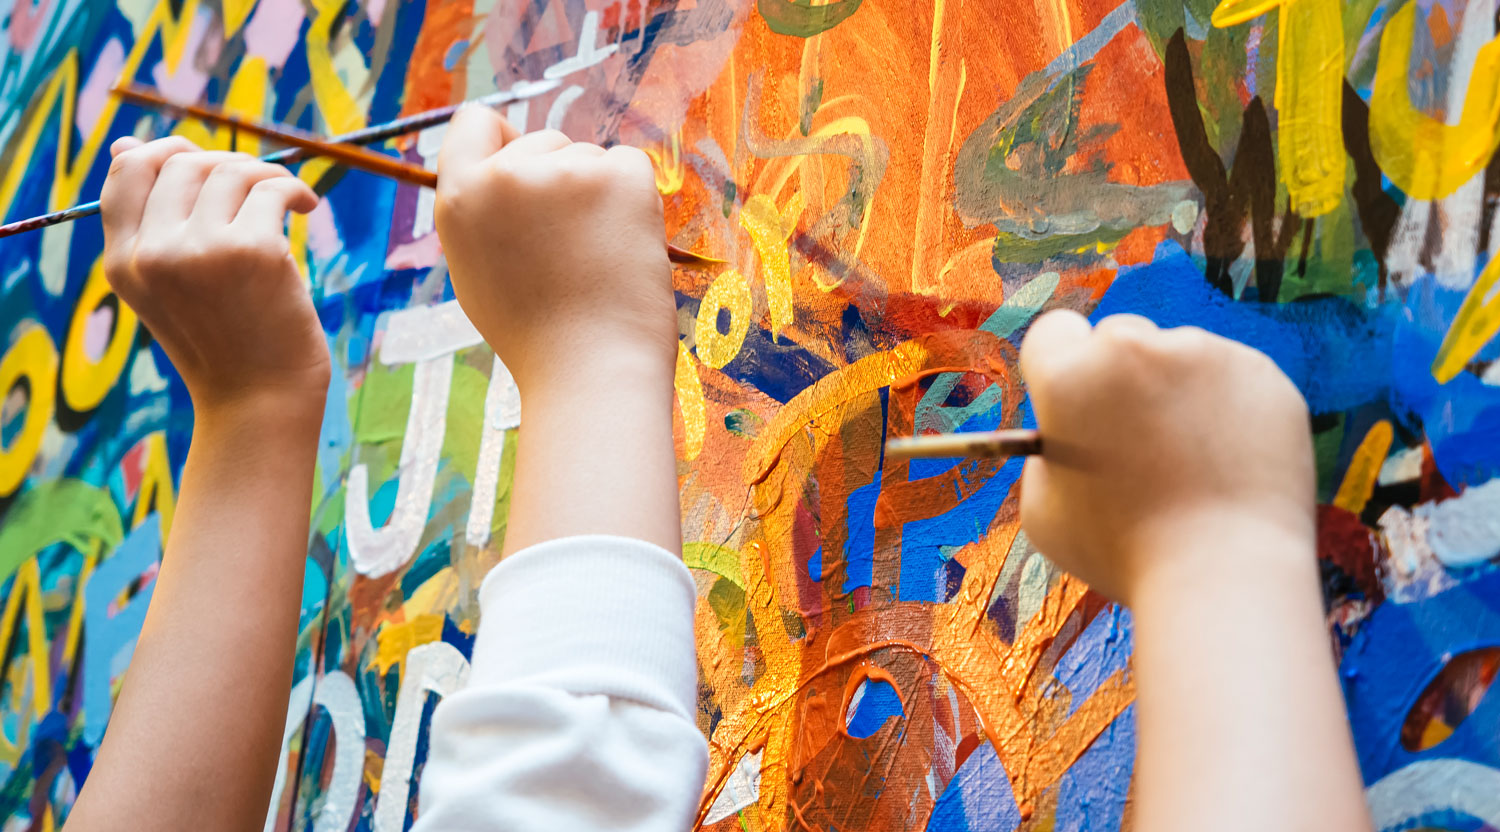 Three children's hands painting a colorful wall mural with paint brushes